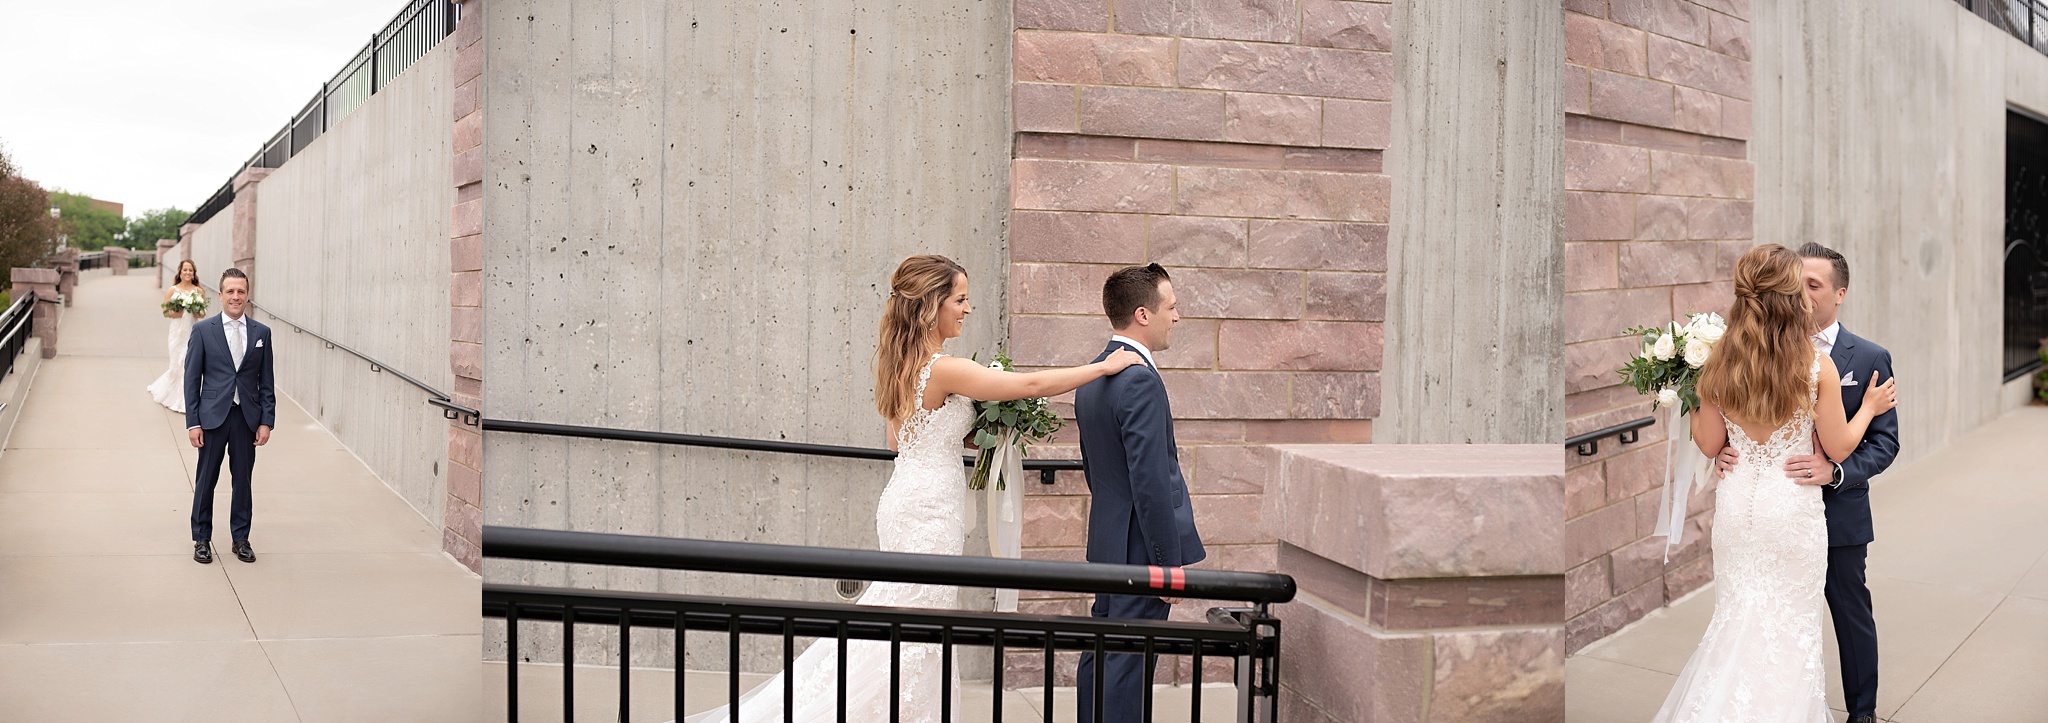 bride and groom share intimate first look downtown sioux falls